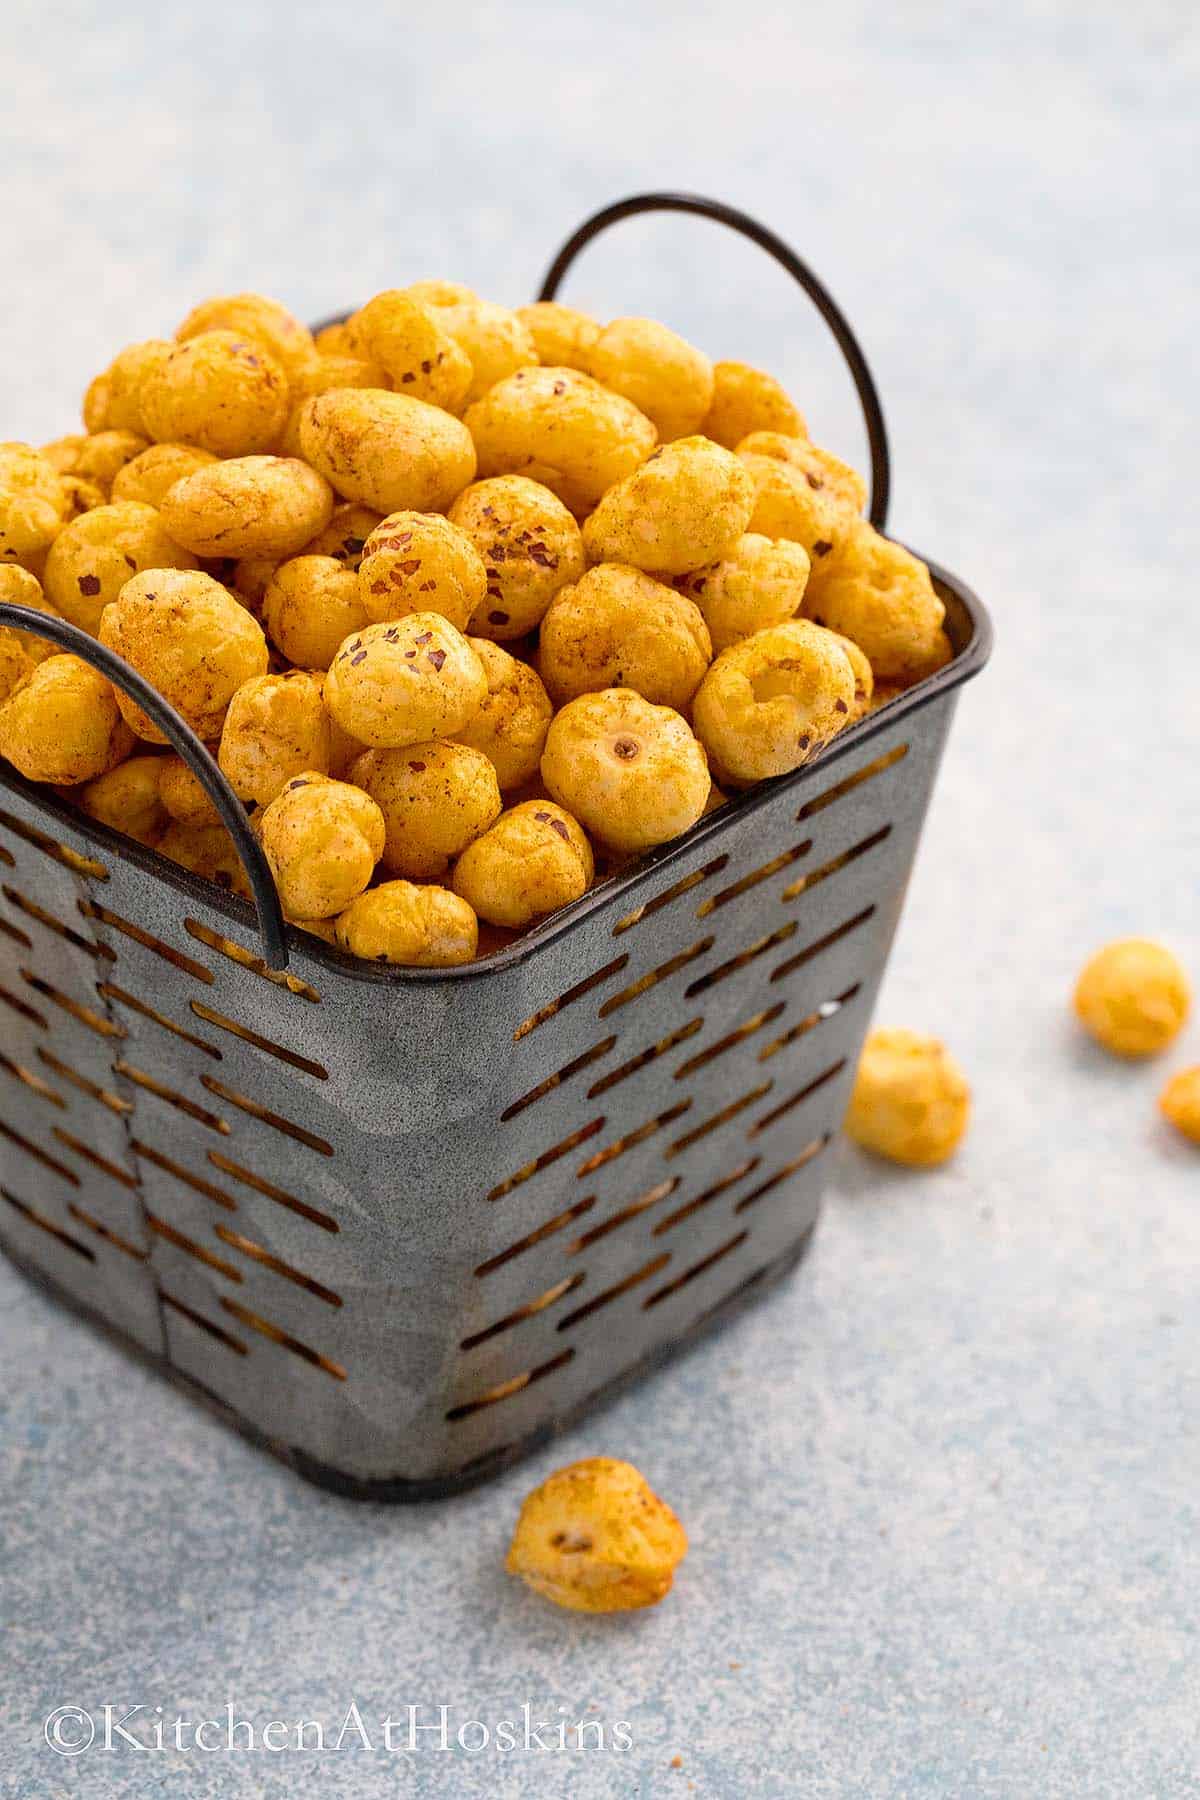 roasted fox nuts piled high on a metal basket.